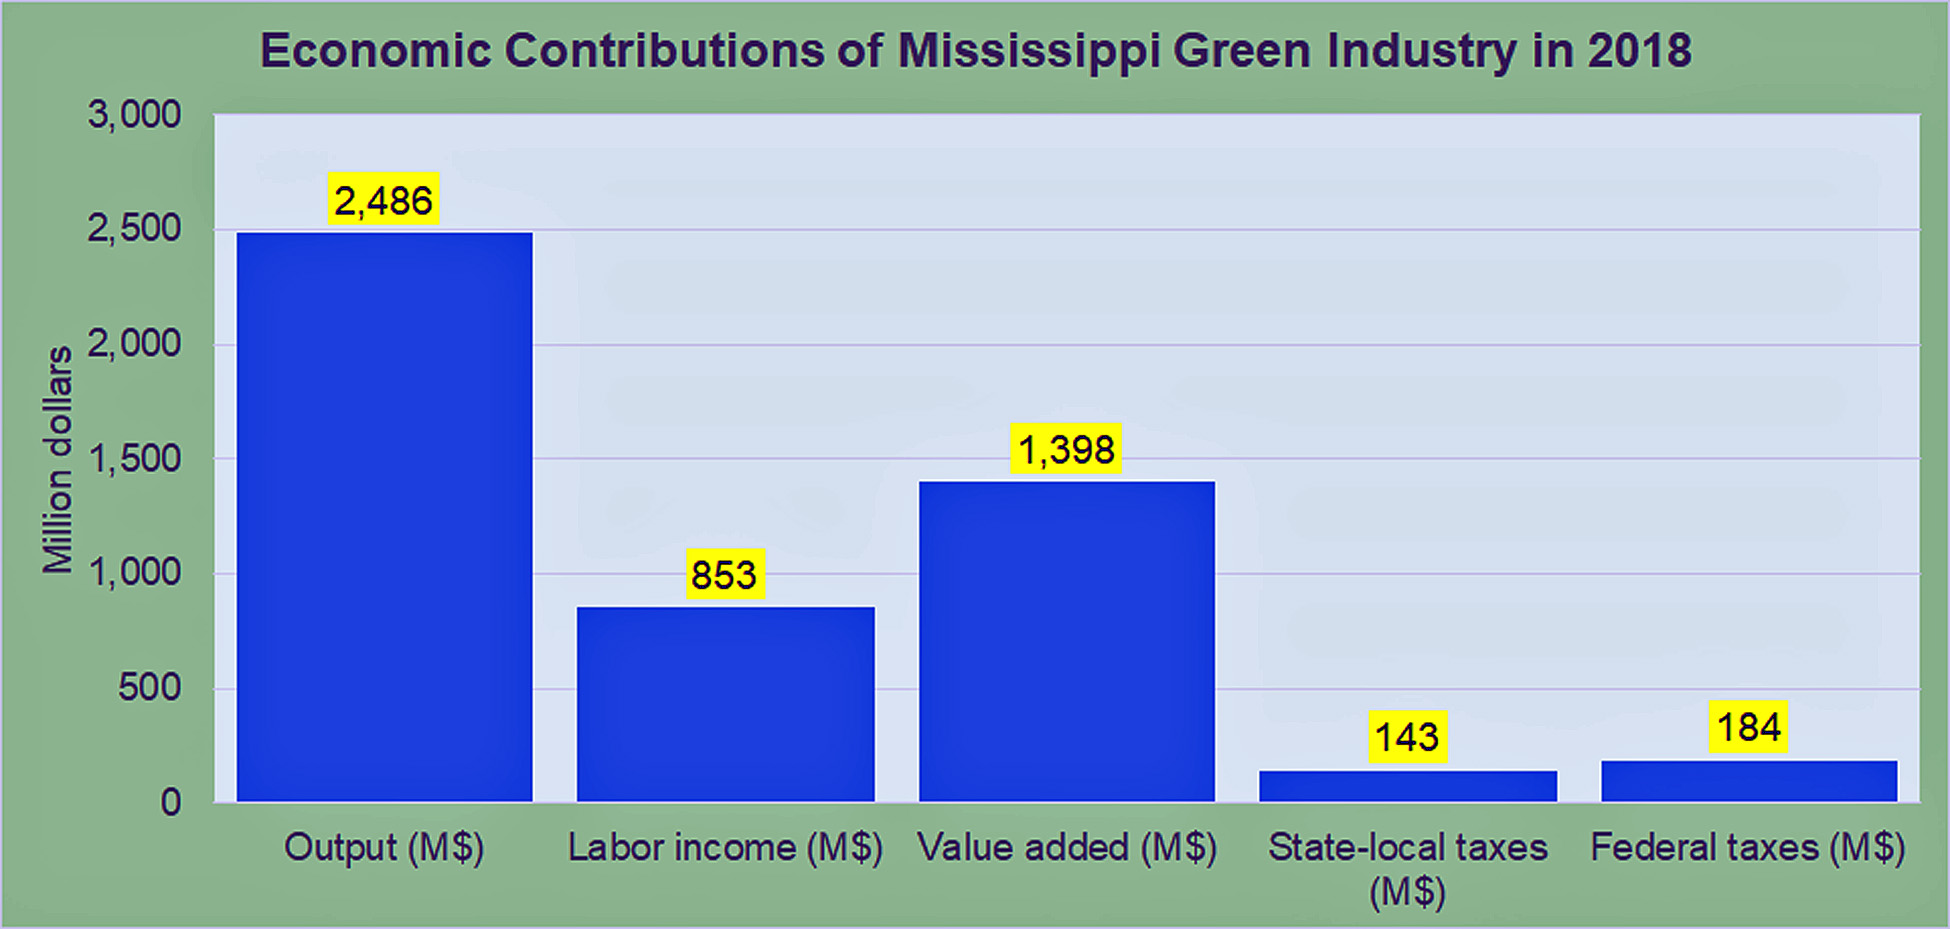 Economic Contributions of Mississippi Green Industry in 2018